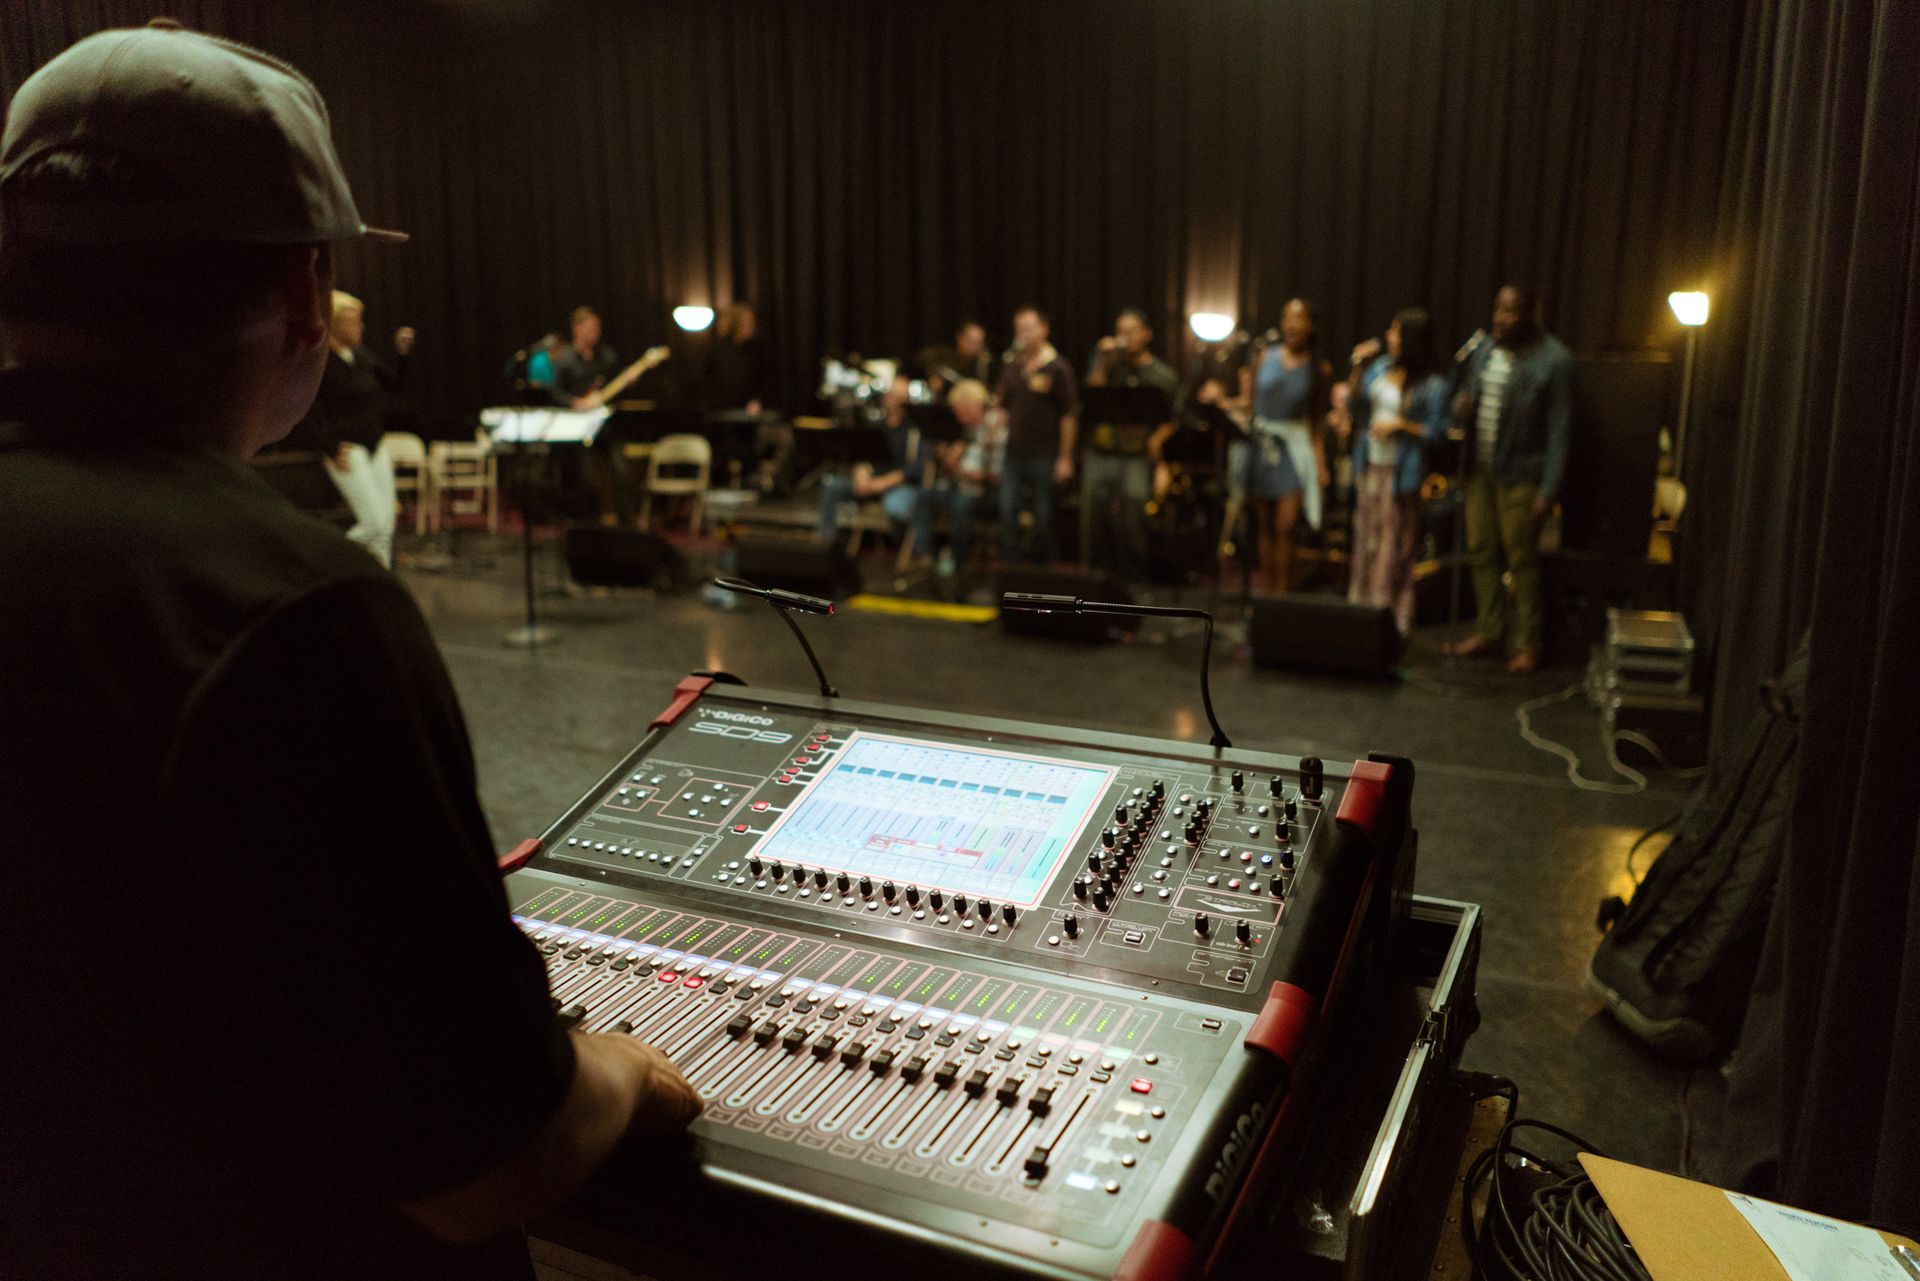 Audio controls for dance and music rehearsal